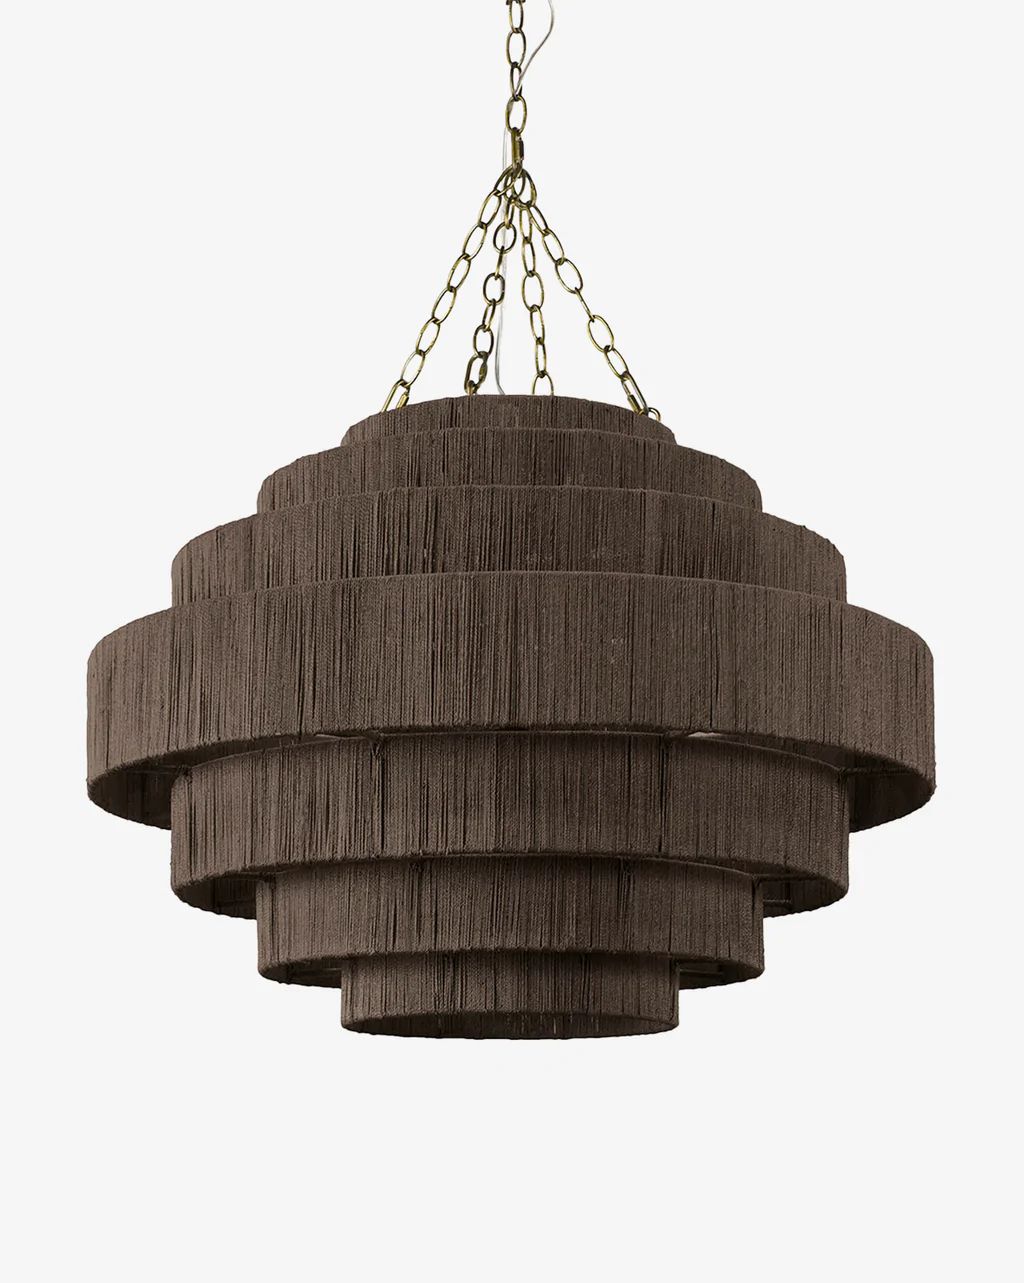 Everly Pendant | McGee & Co.